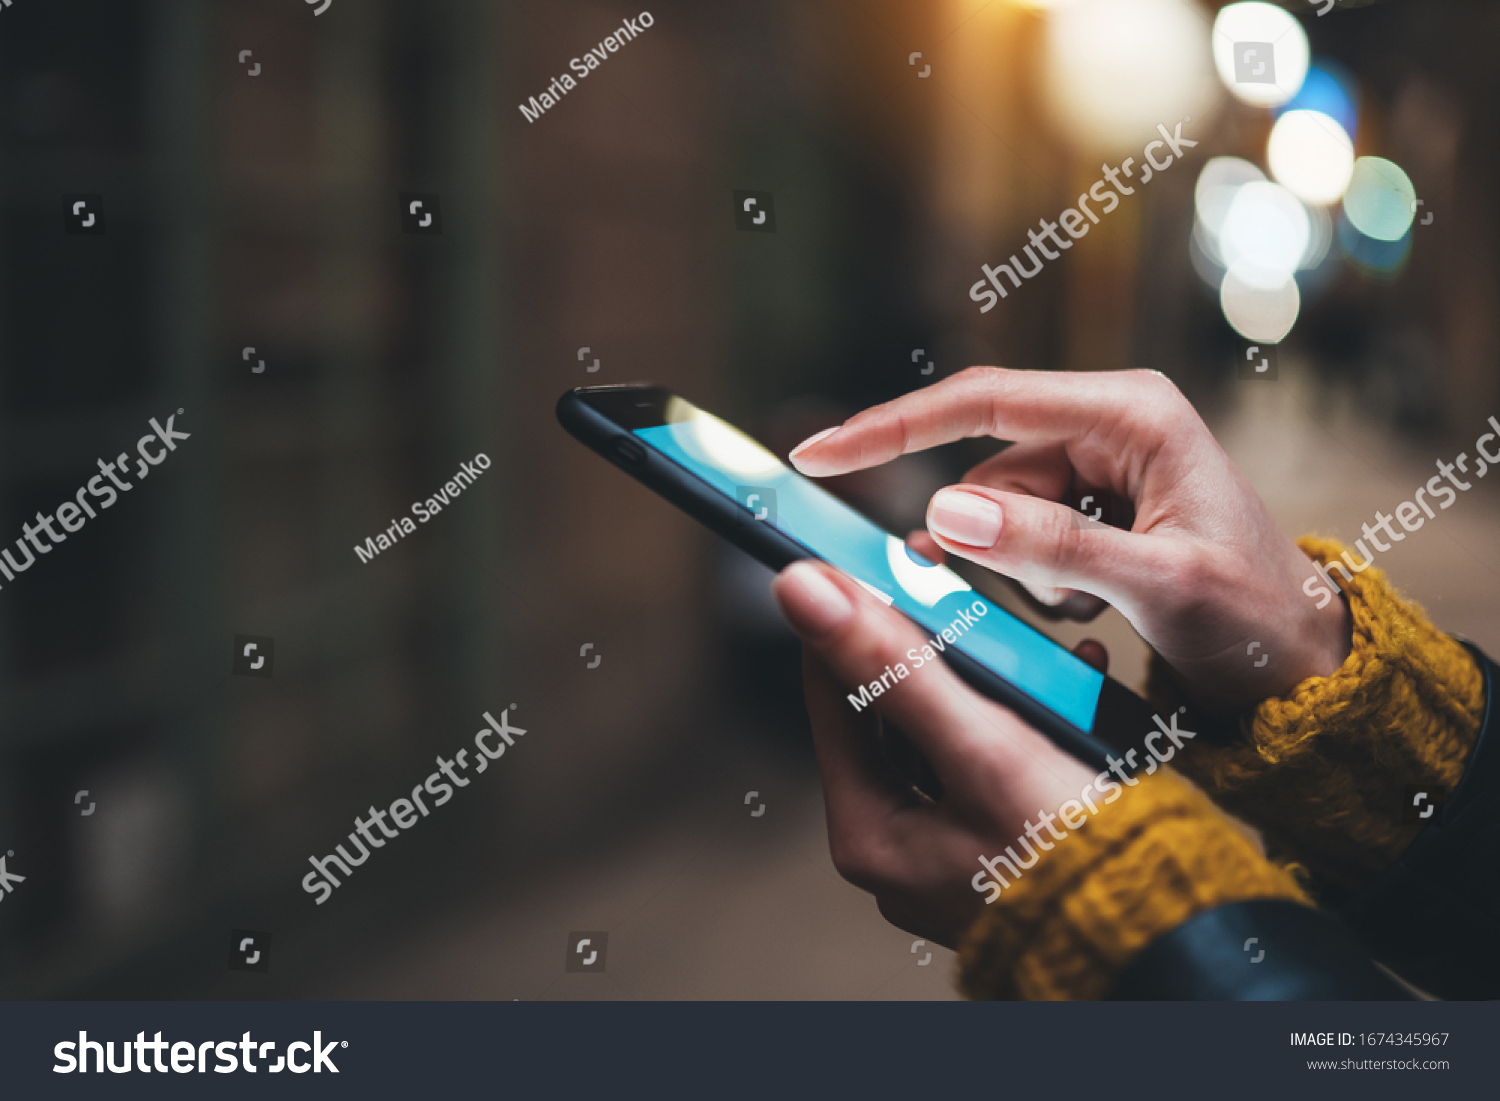 point finger on screen mobile phone closeup, person texting text message, hipster touch blue screen on smartphone light night city, girls using in hands cellphone close up, online internet #1674345967